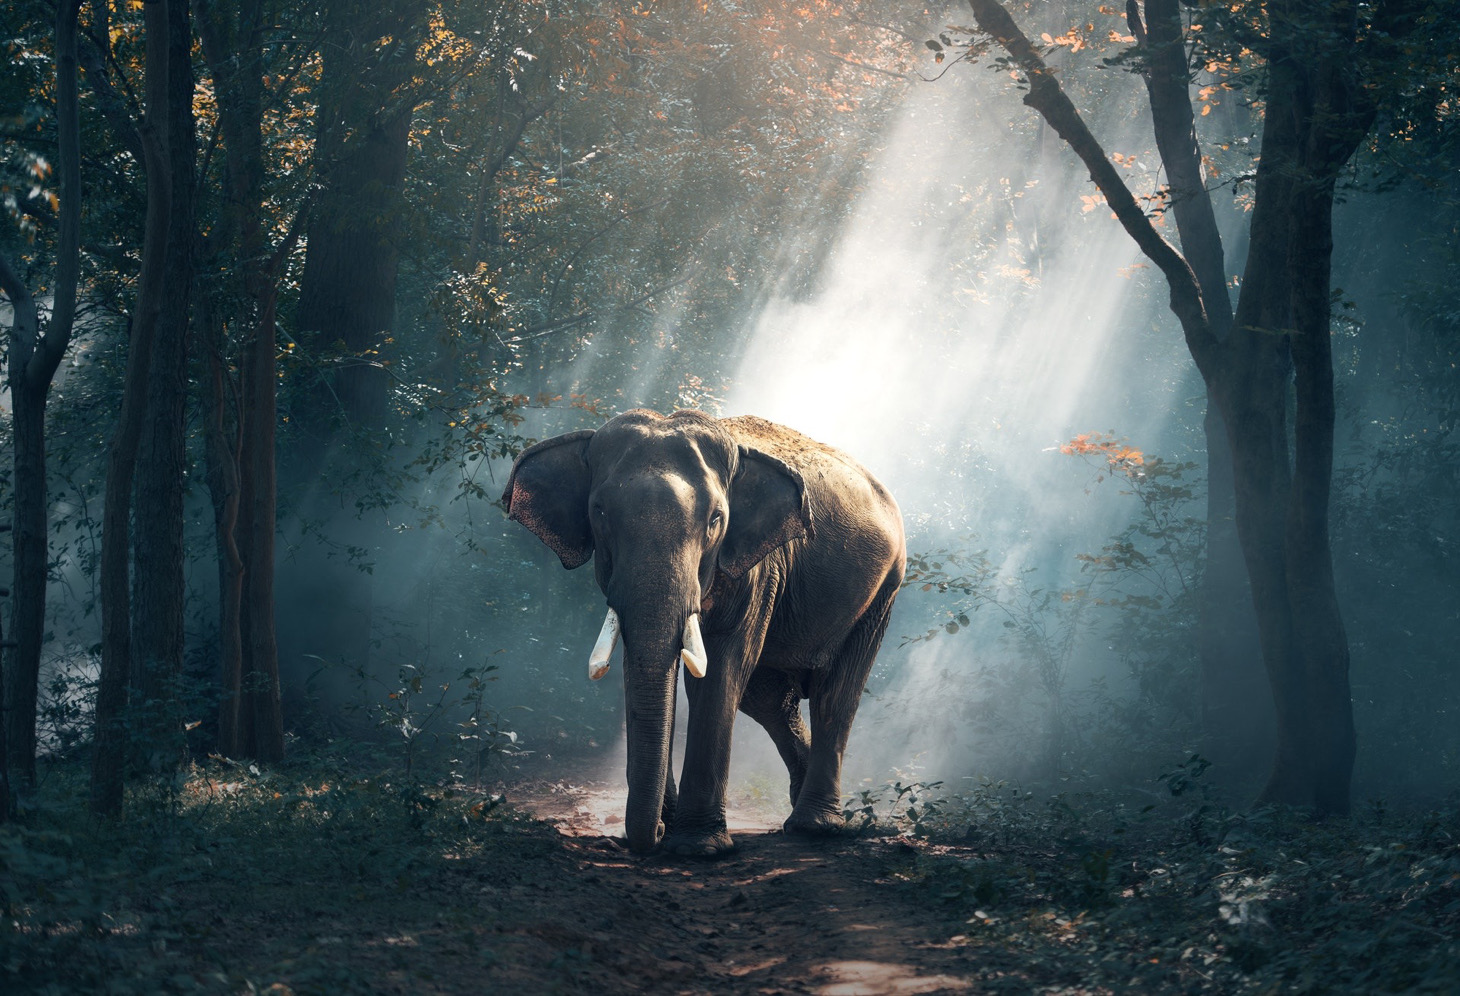 An elephant in the woods.